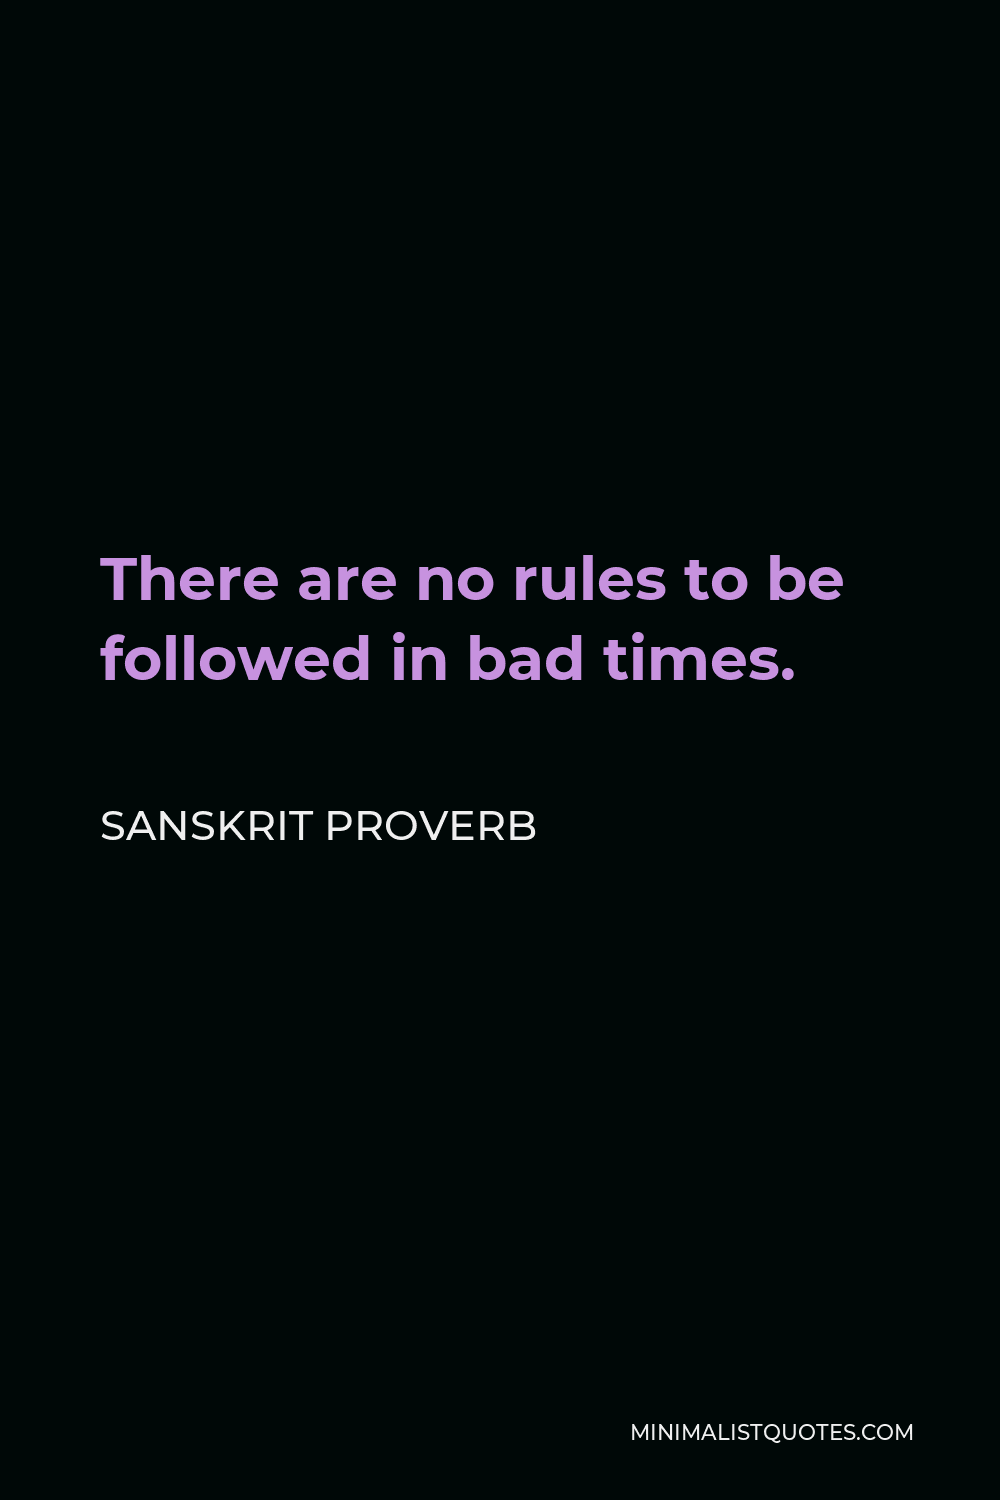 Sanskrit Proverb Quote - There are no rules to be followed in bad times.